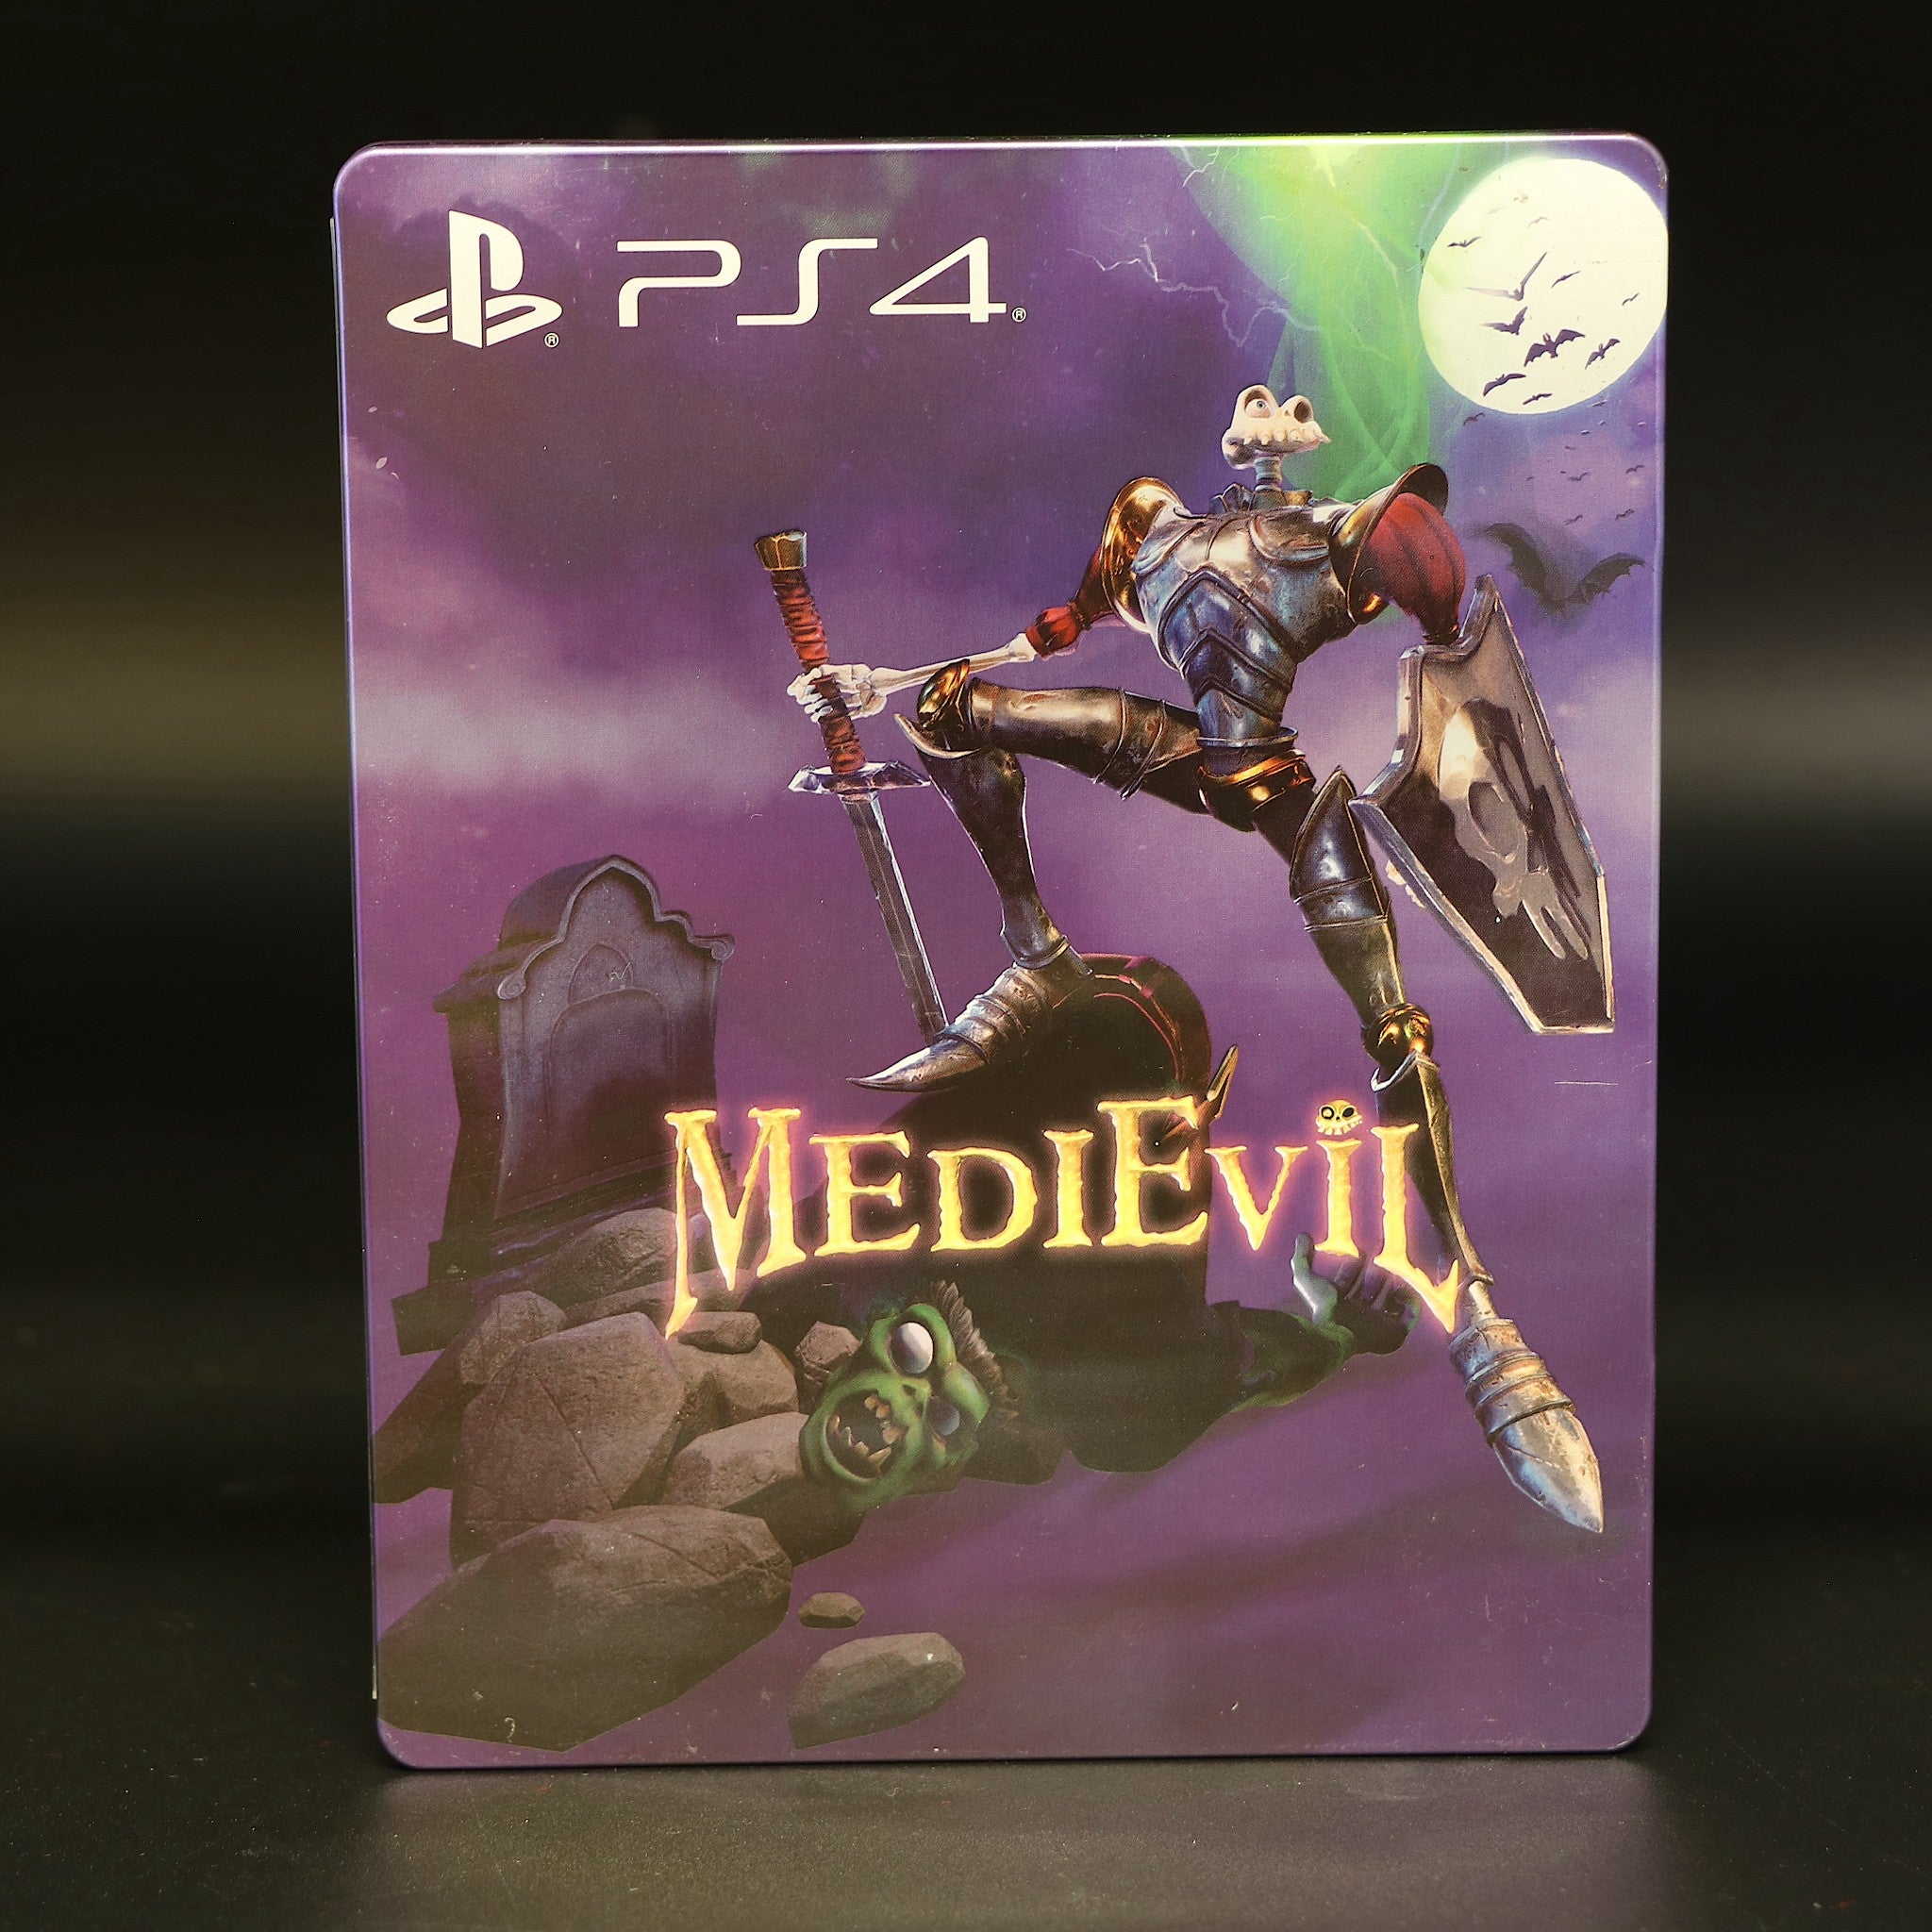 Medievil Limited Edition SteelBook Tin Case For PS4 Game